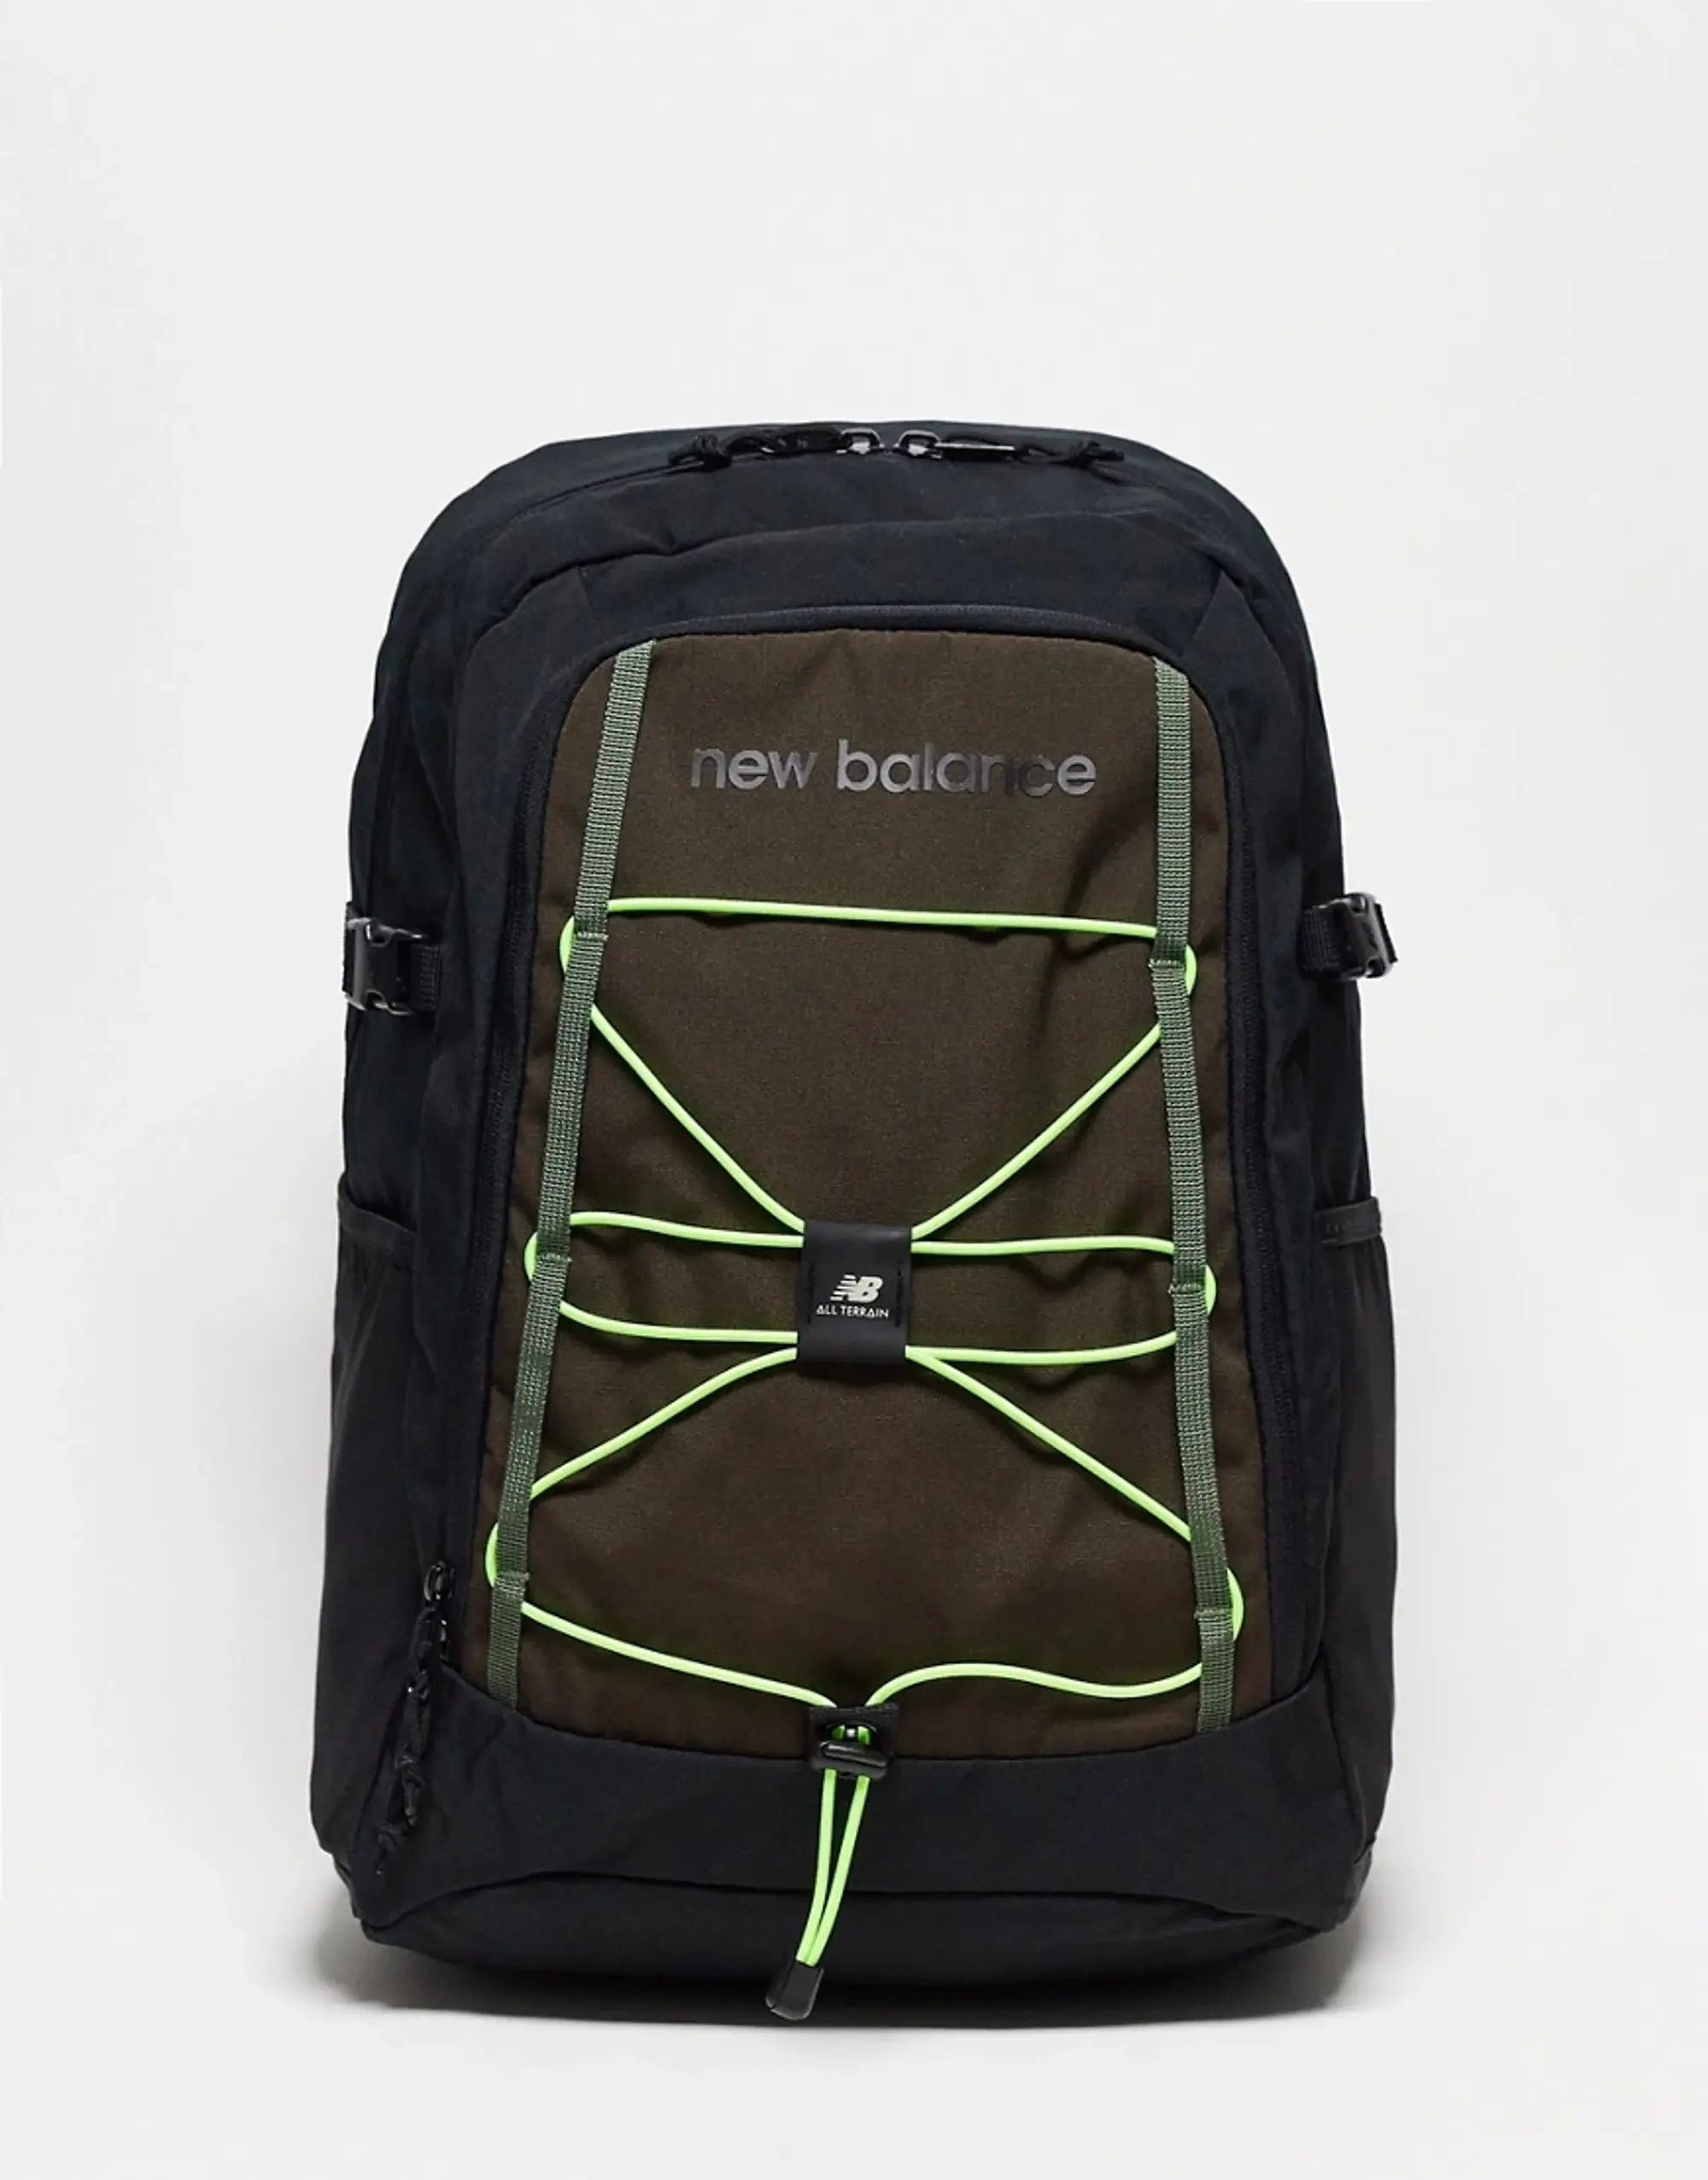 New Balance All Terrain Bungee Backpack In Black